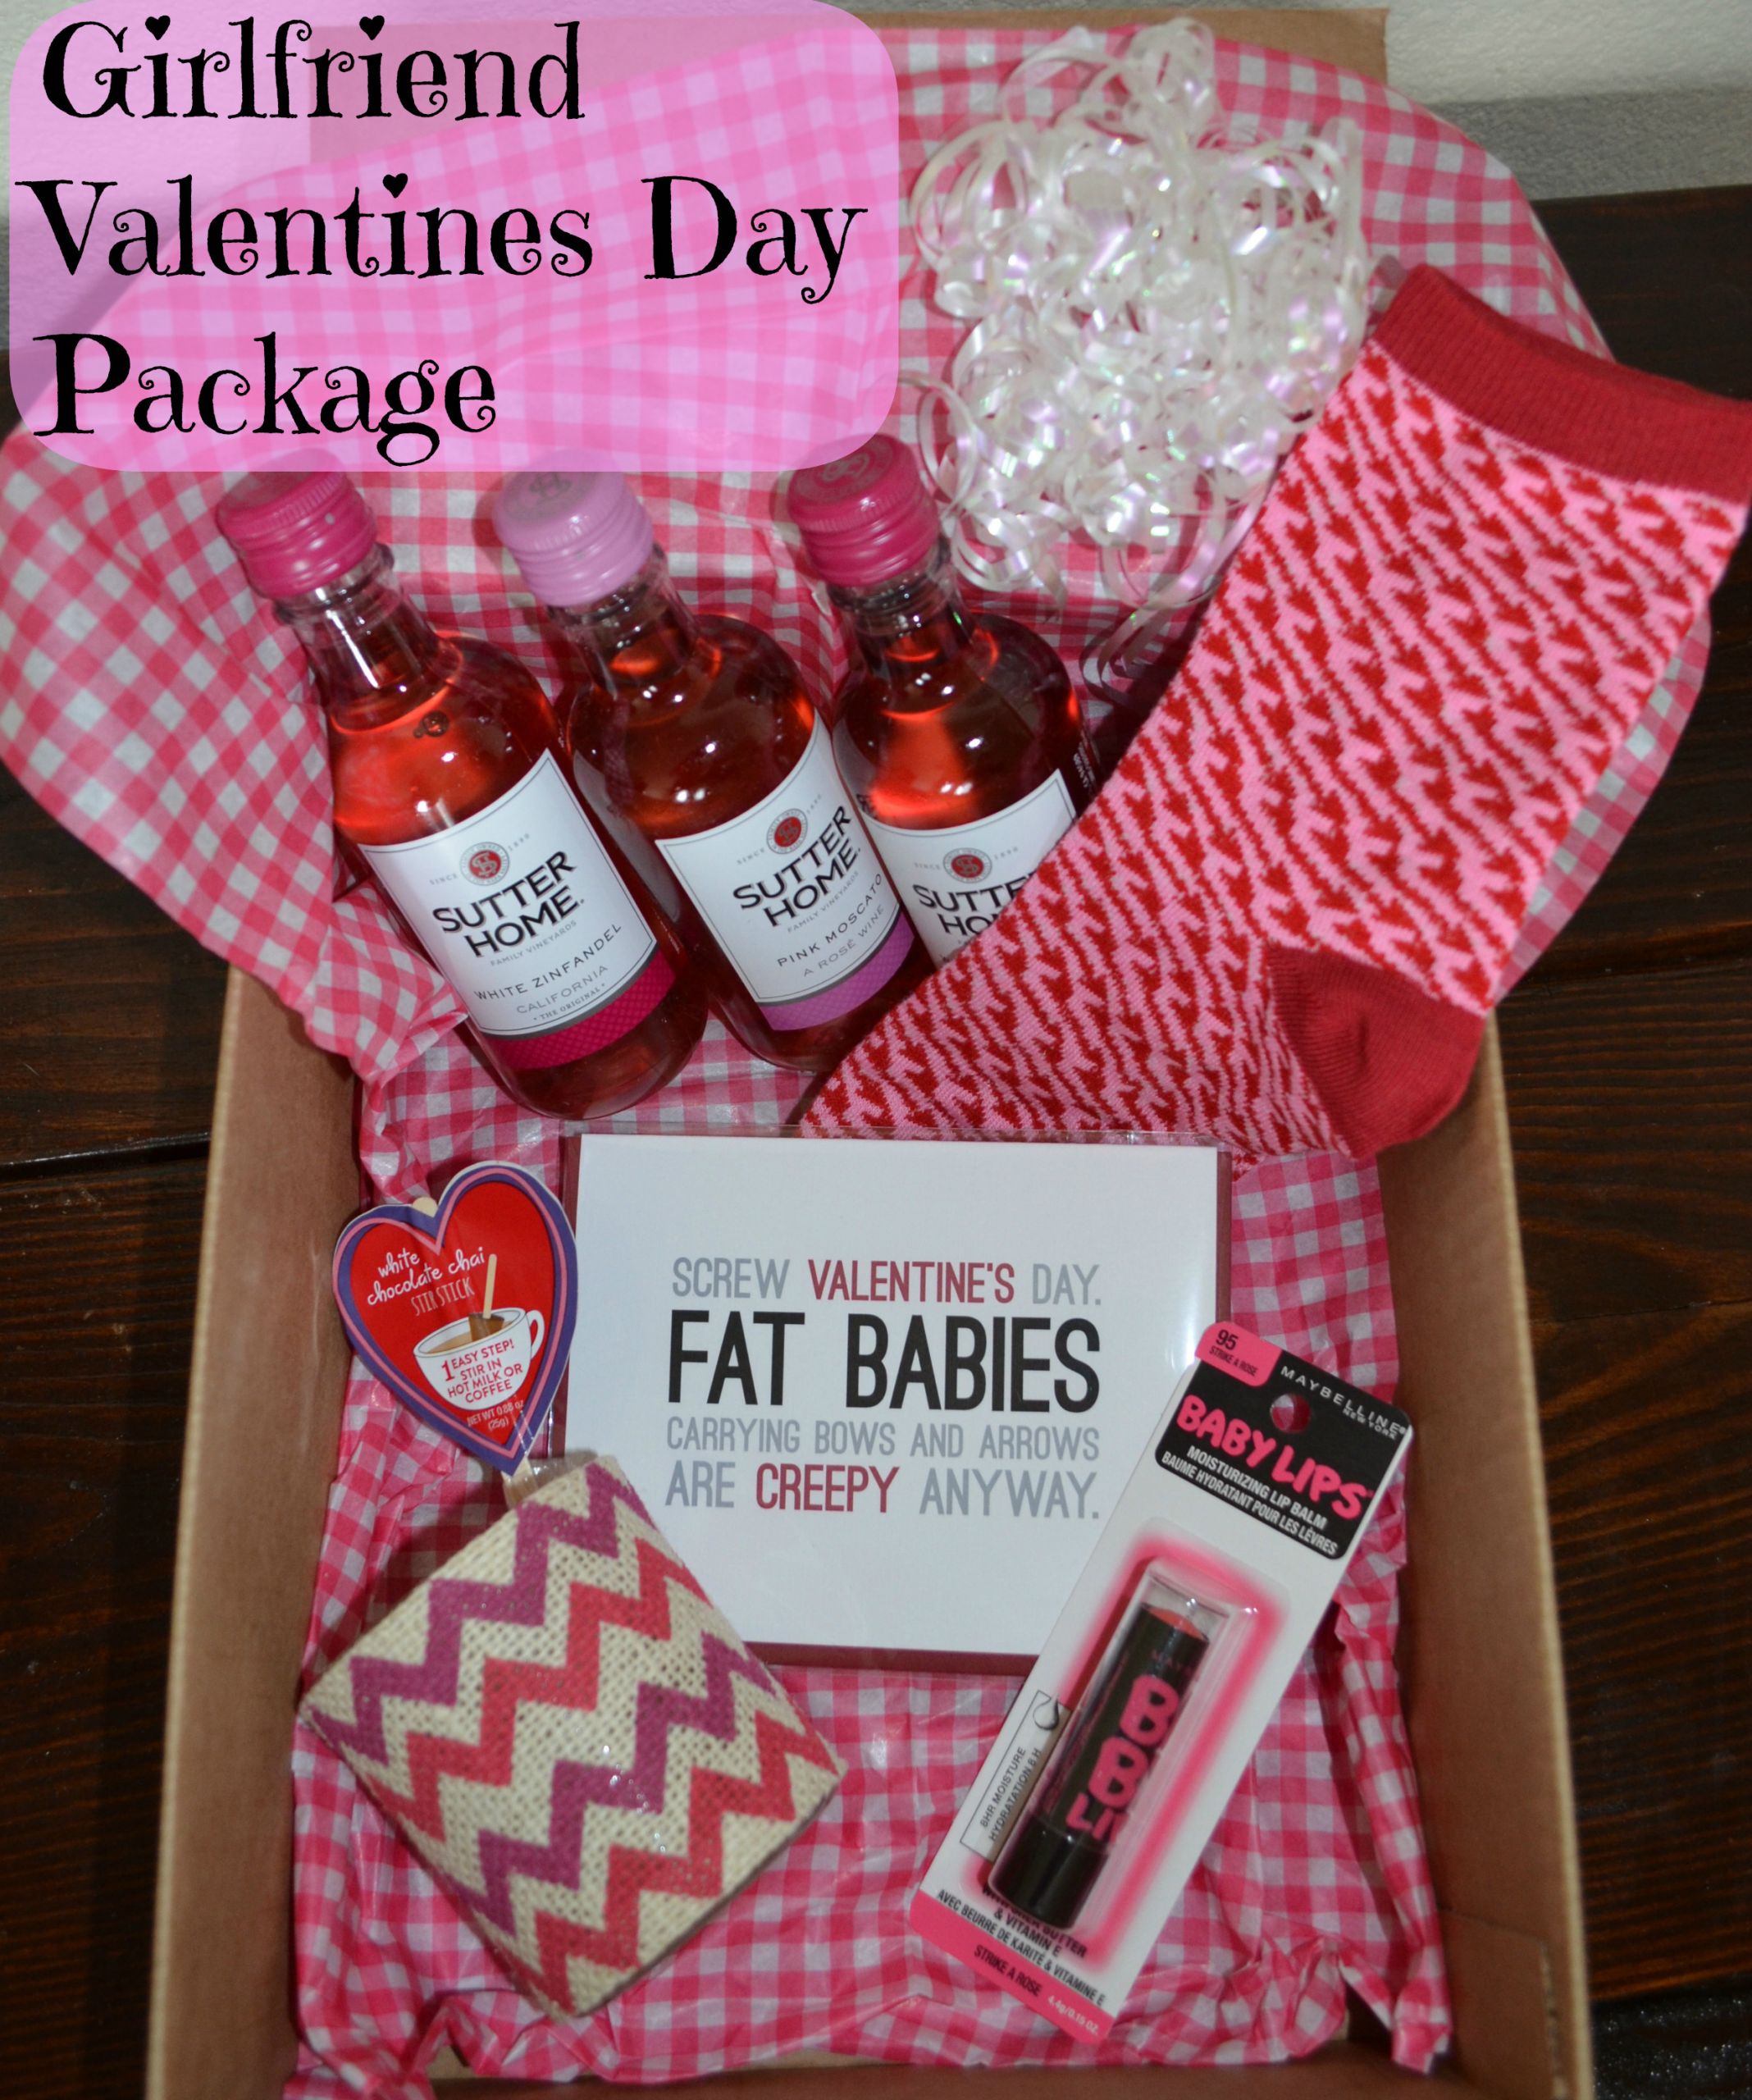 Girlfriend Valentine Gift Ideas
 24 ADORABLE GIFT IDEAS FOR THE WOMEN IN YOUR LIFE